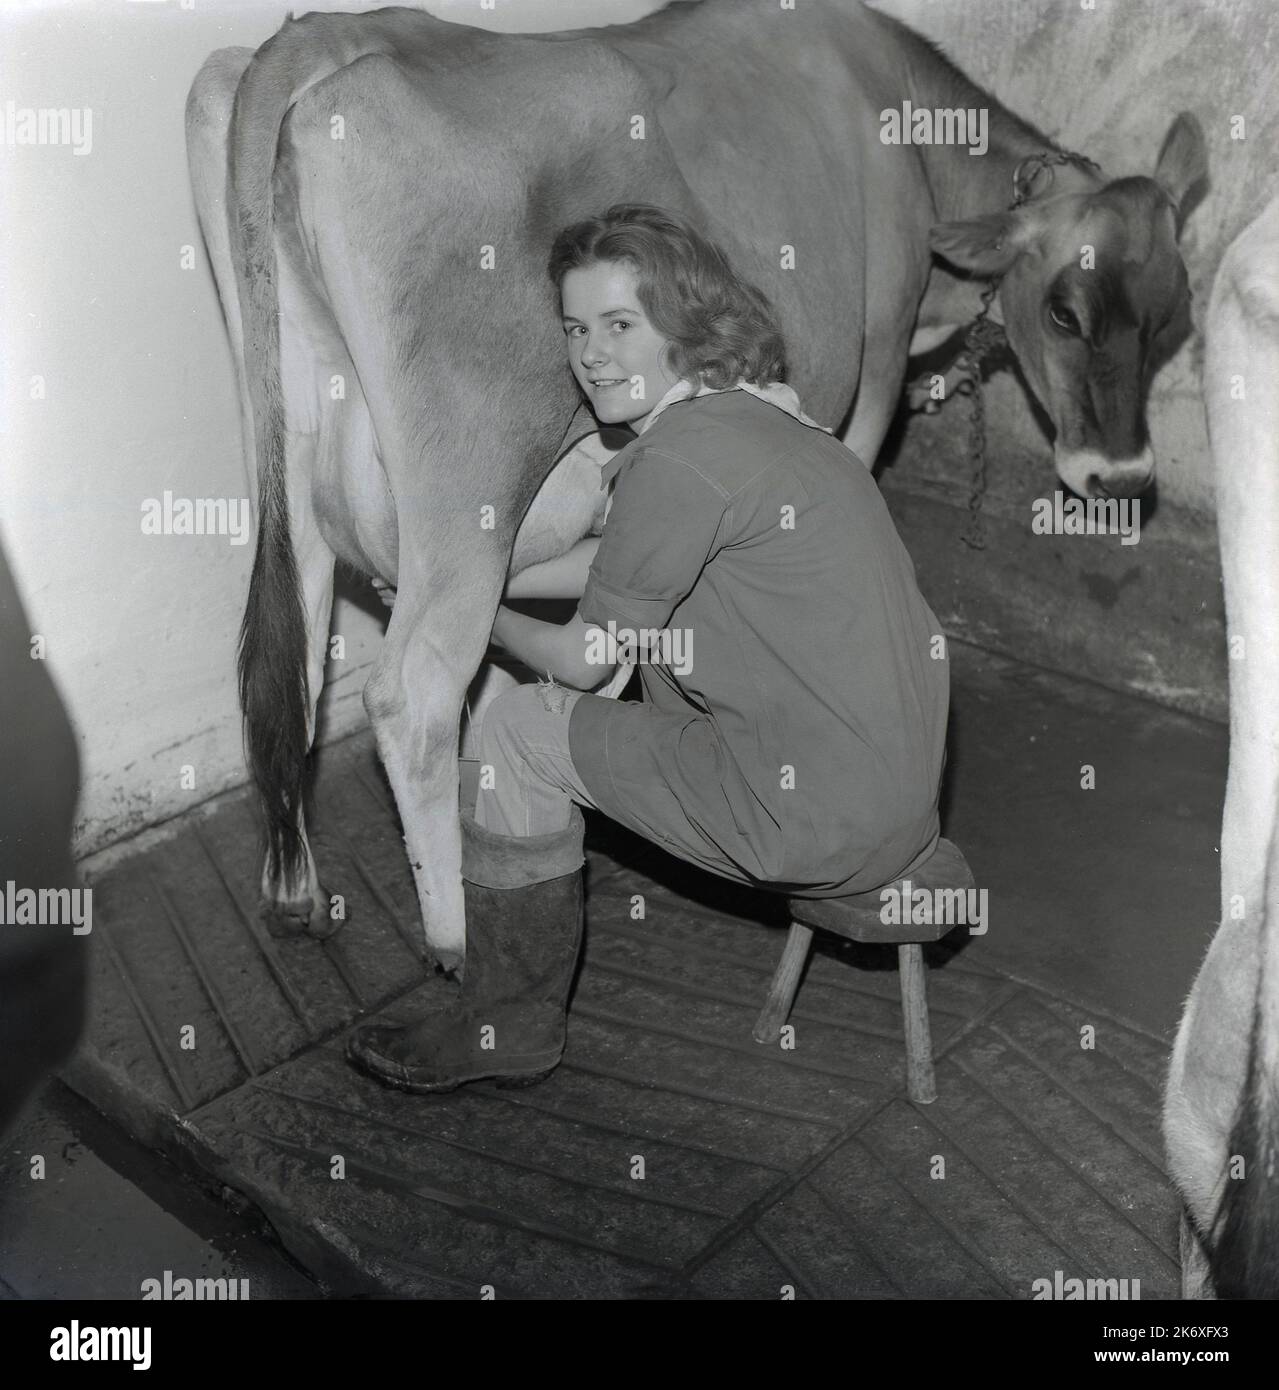 1964, historical, a teenage girl sitting on a small stool hand milking a cow, Mayortome Manor, Wendover, Buckinghamshire, England, UK. The girl is a pupil at The Farmhouse School, established by Quaker, Isobel Fry around 1900, for children aged 8 to 18 years old. All the pupils had to rise early each day, to look after the animals and undertake general farm duties before breakfast. Traditional school lessons would then take place. Fry believed that learning about other subjects, such as science, nature, accounting came through the work activities the children undertook on the farm. Stock Photo